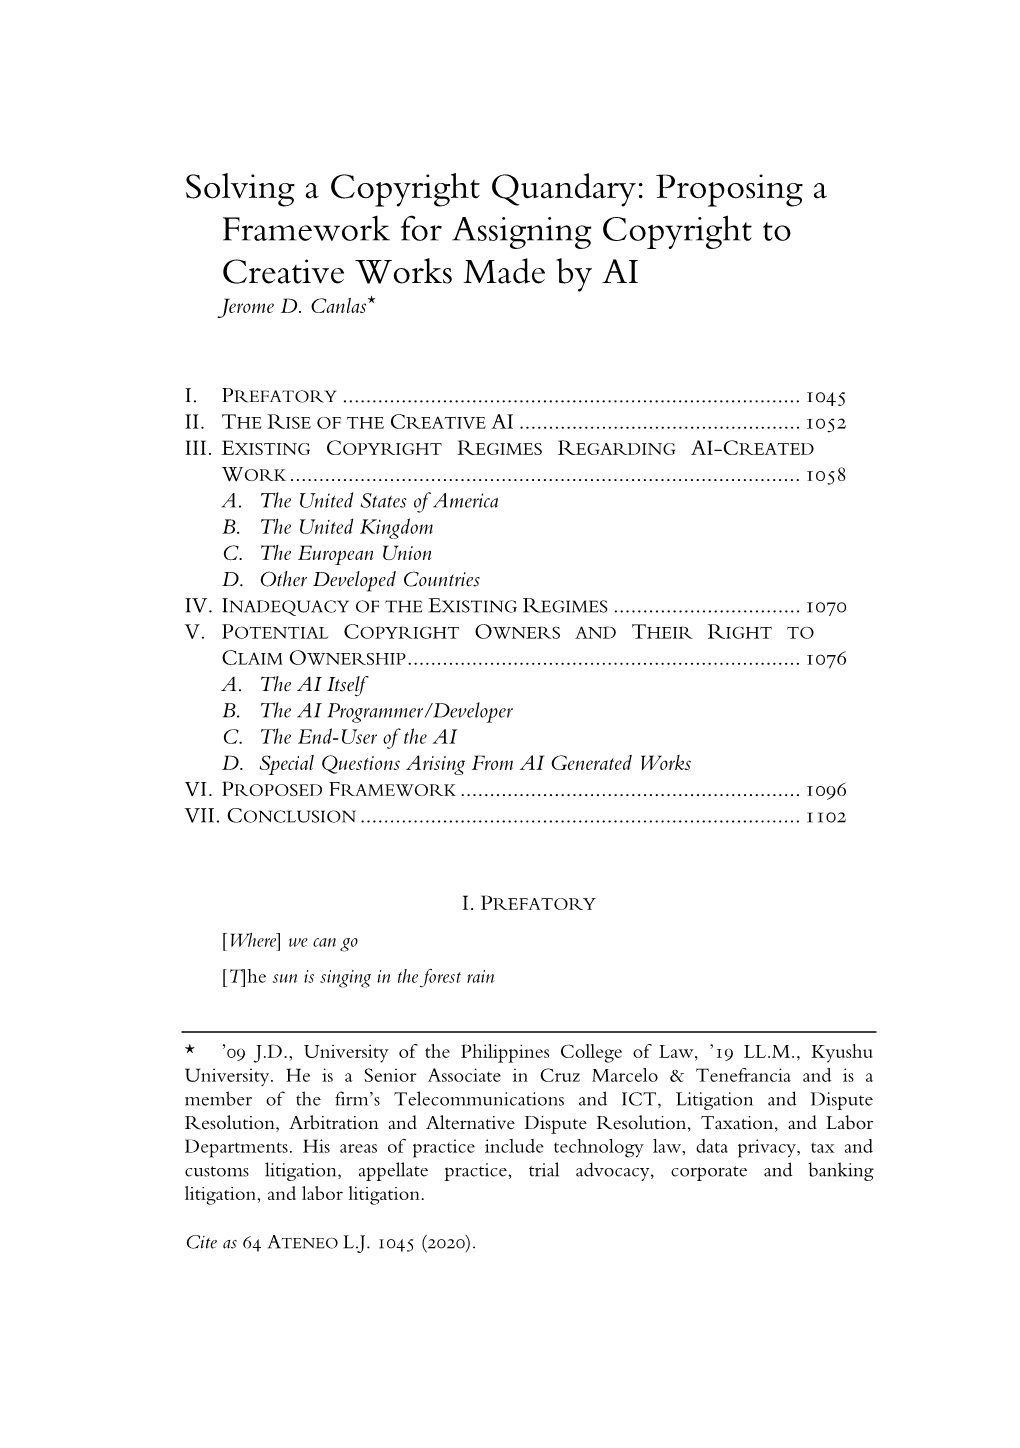 Proposing a Framework for Assigning Copyright to Creative Works Made by AI Jerome D